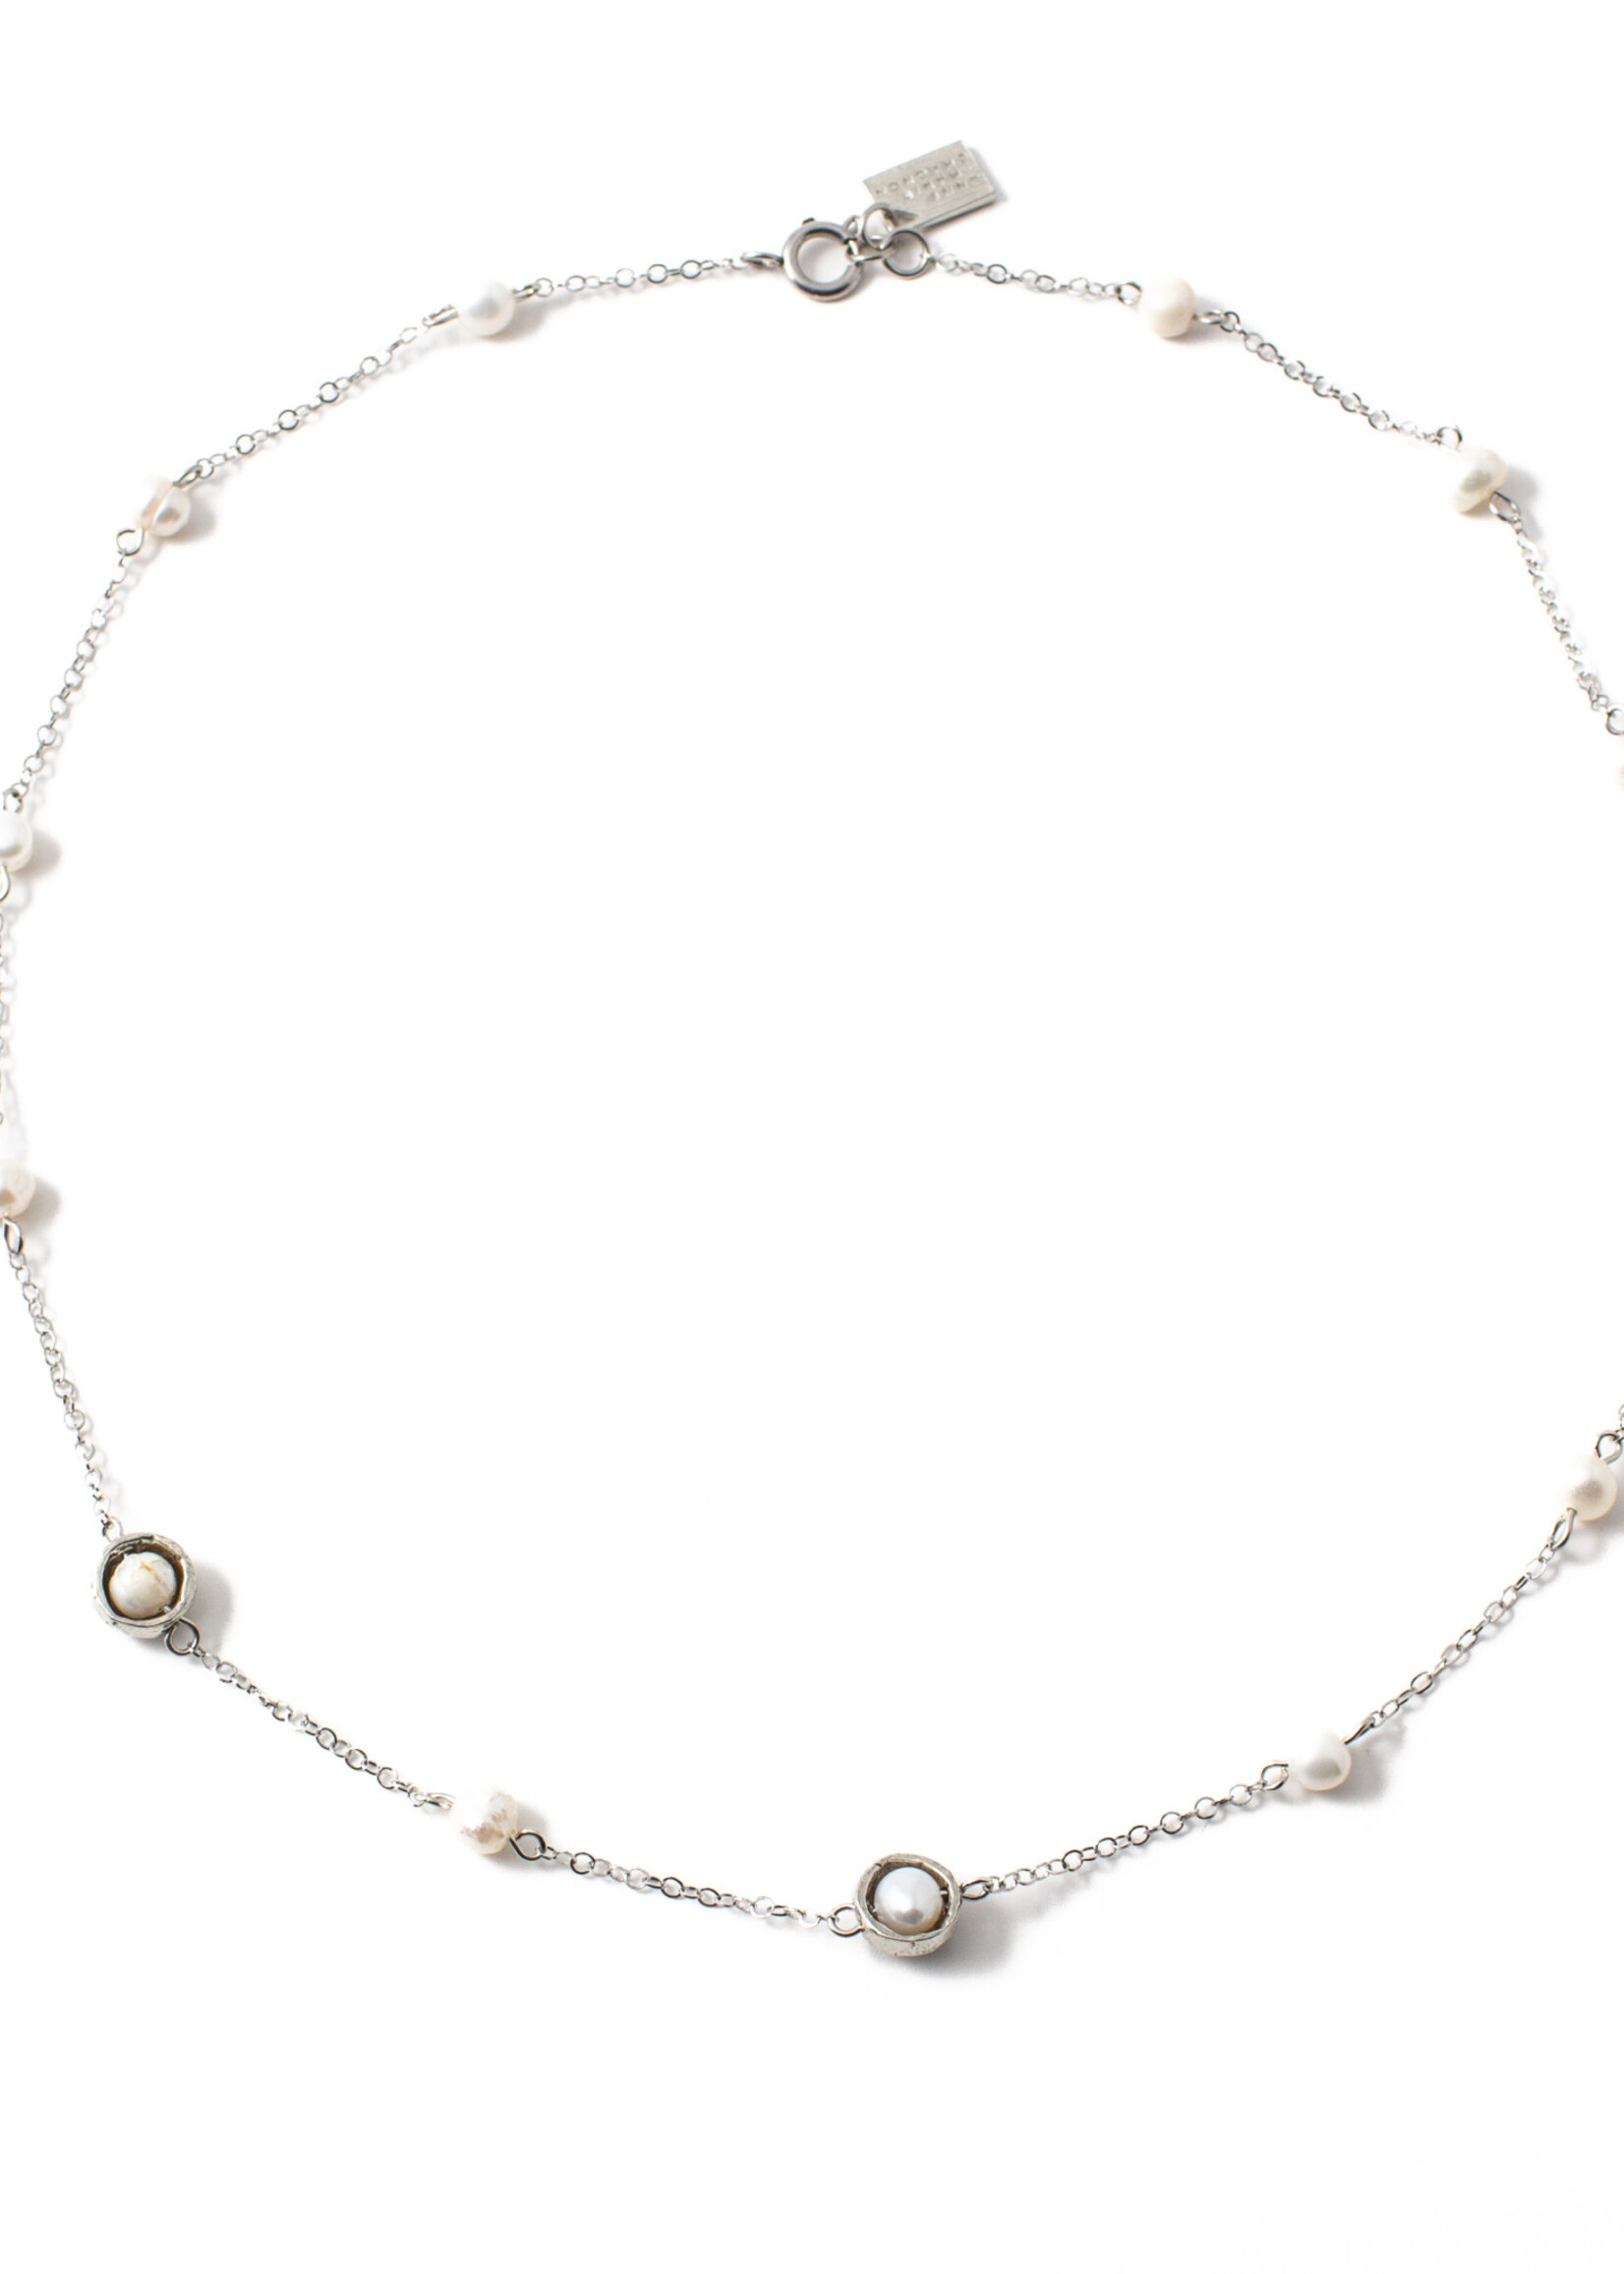 Anne-Marie Chagnon Isadora Necklace